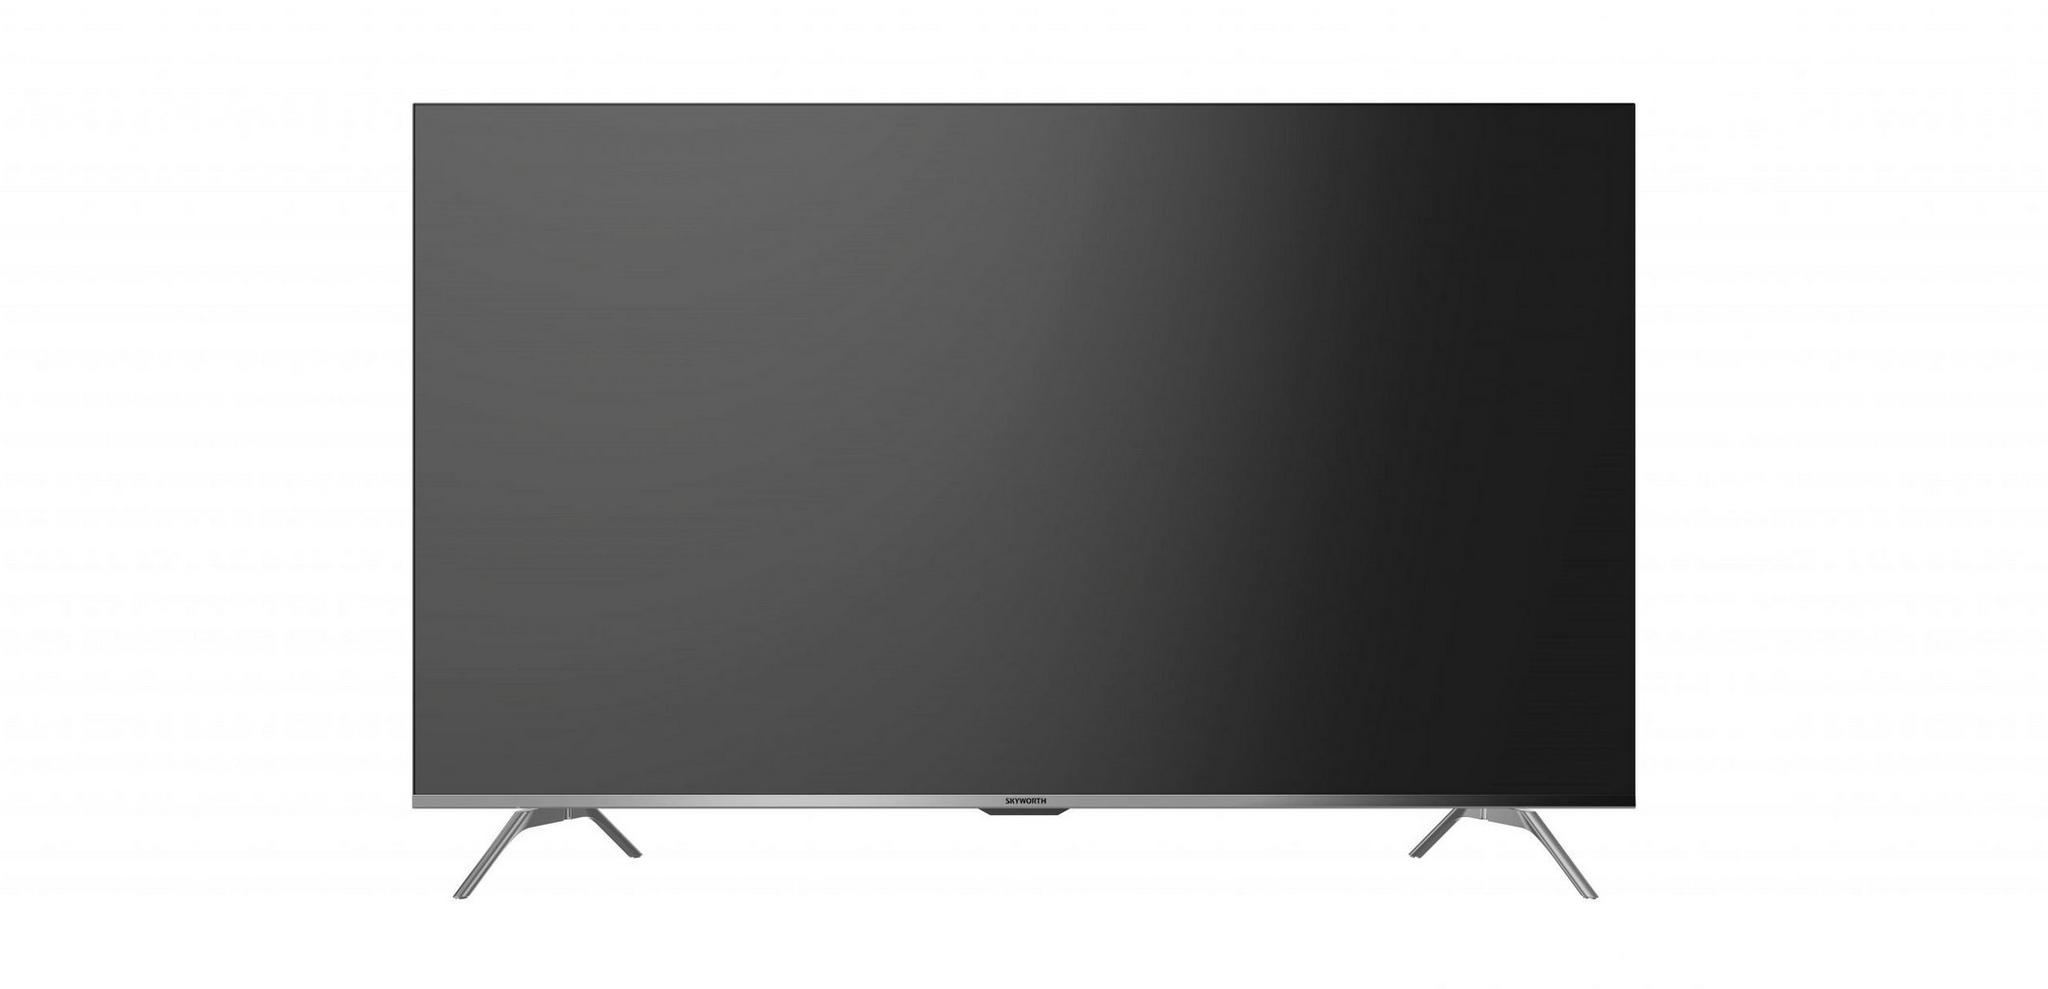 Skyworth 65-inch Android 4K LED TV (65SUC9300)